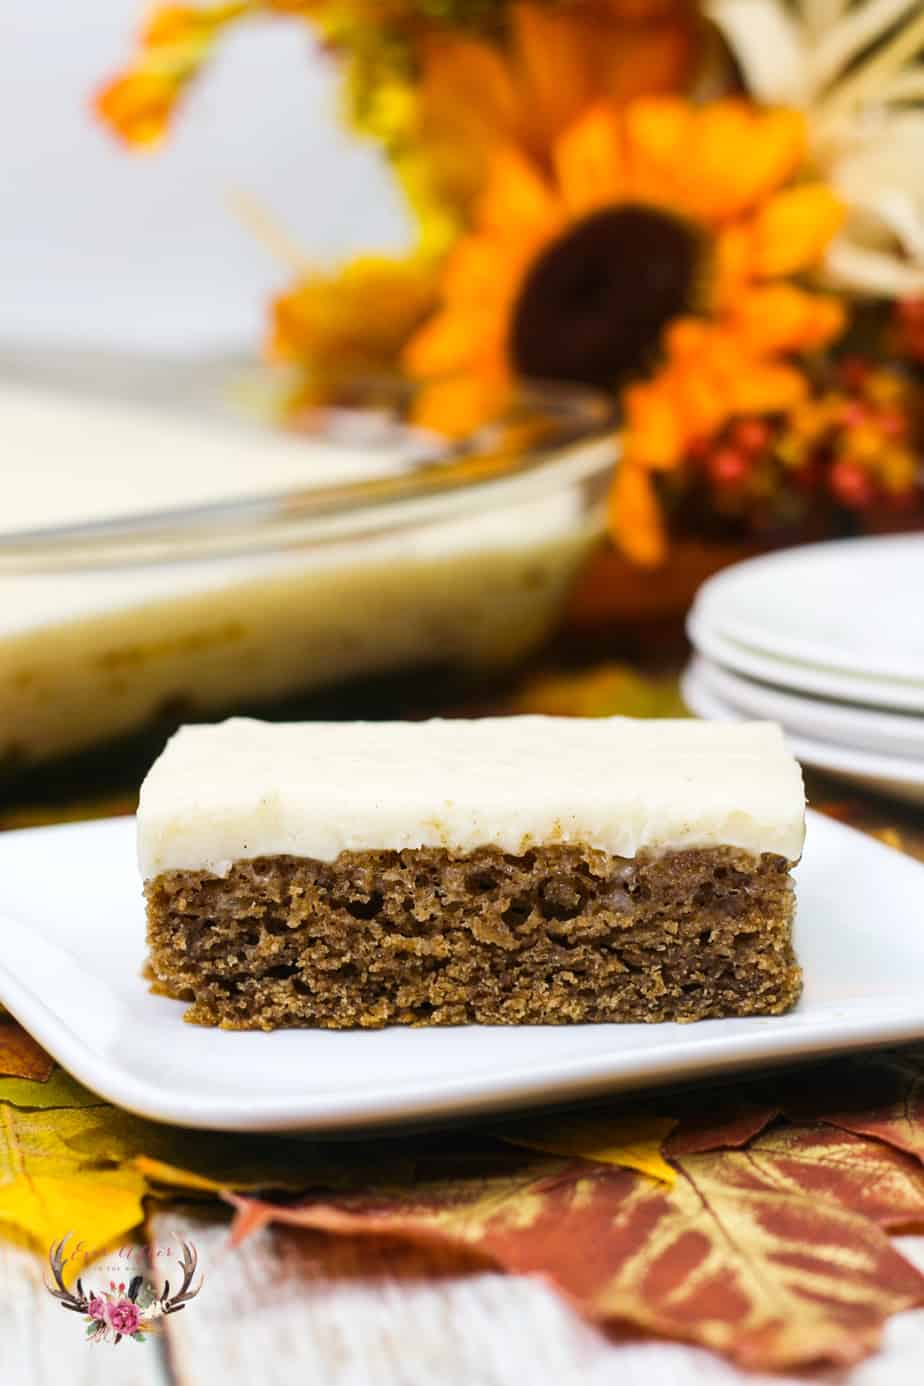 This Apple Sheet Cake has the perfect blend of cinnamon, caramel and apple goodness.